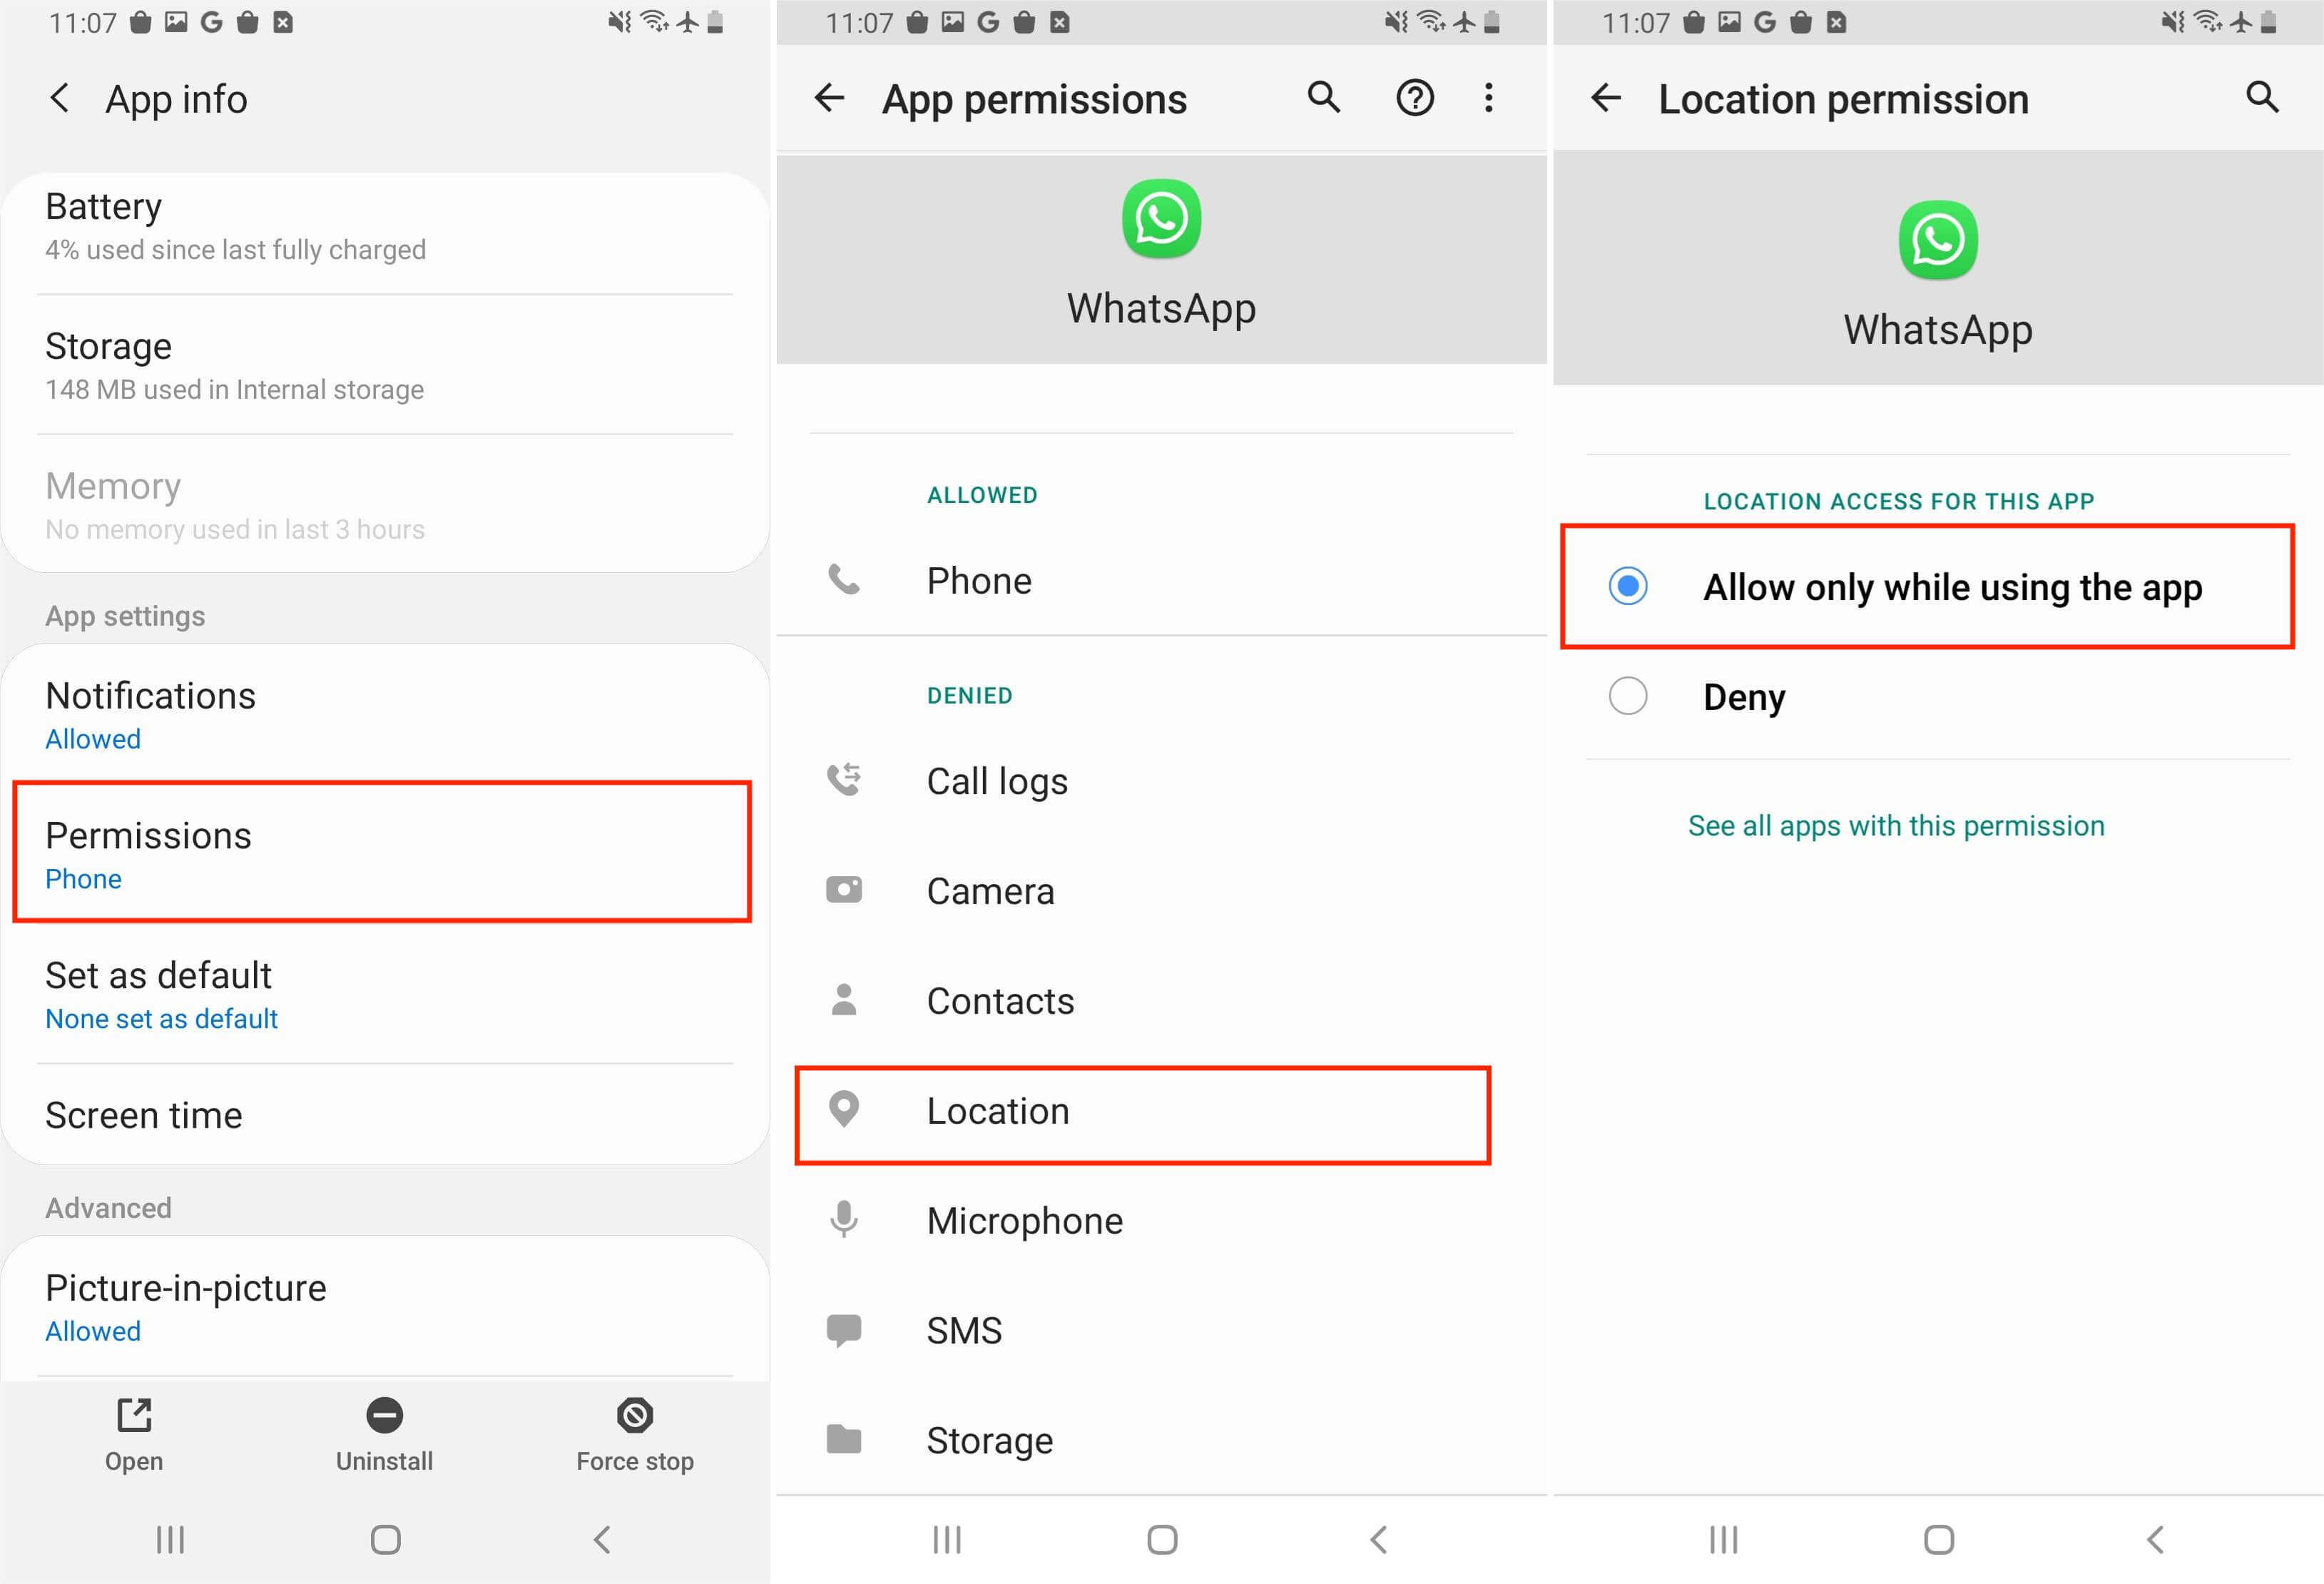  Enable Location Permissions for WhatsApp on Android